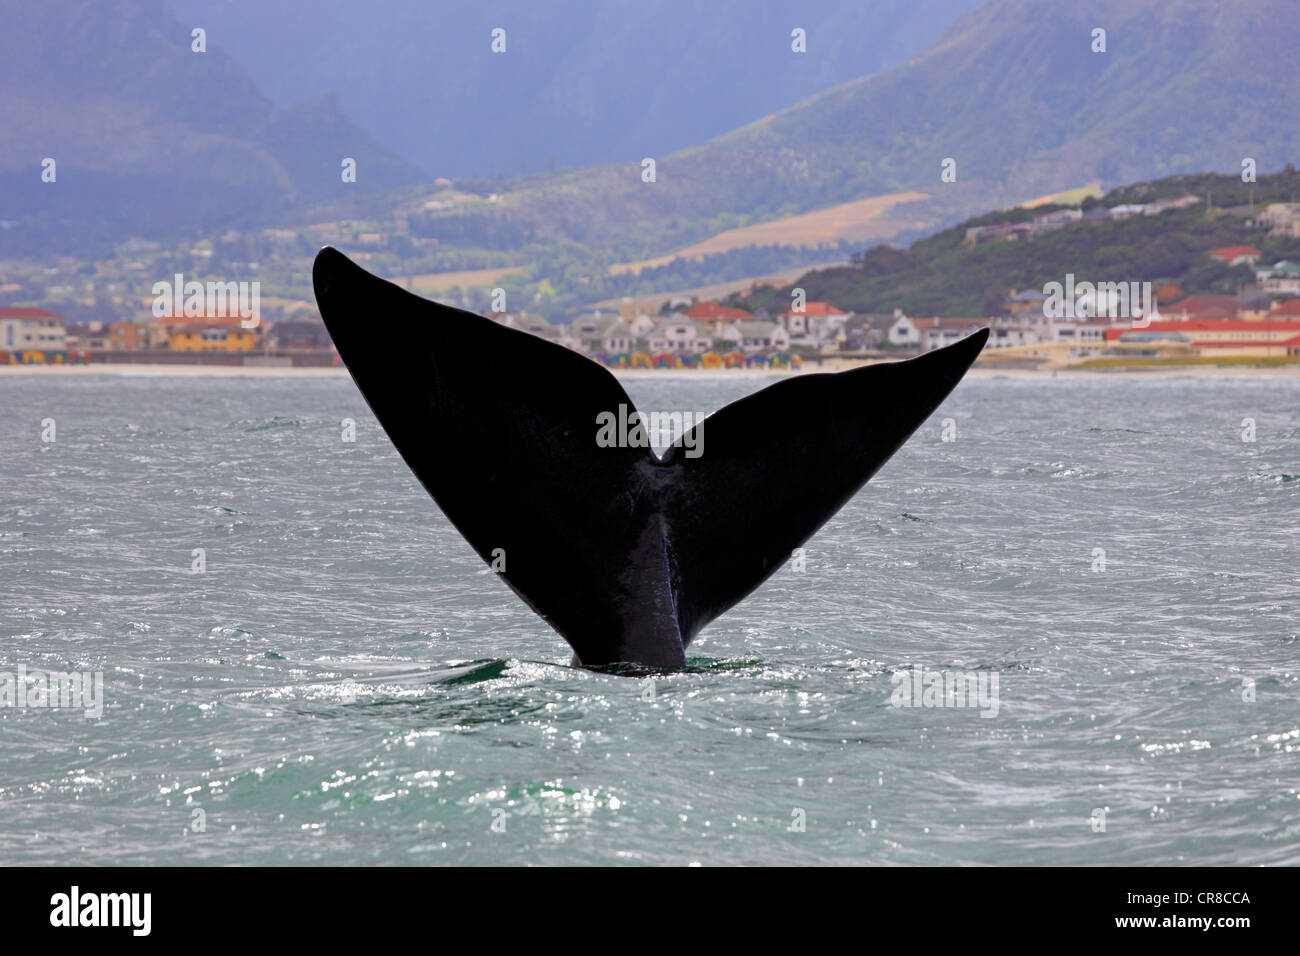 Fluke, Southern Right Whale (Balaena glacialis), adult, Simon's Town, South Africa, Africa Stock Photo